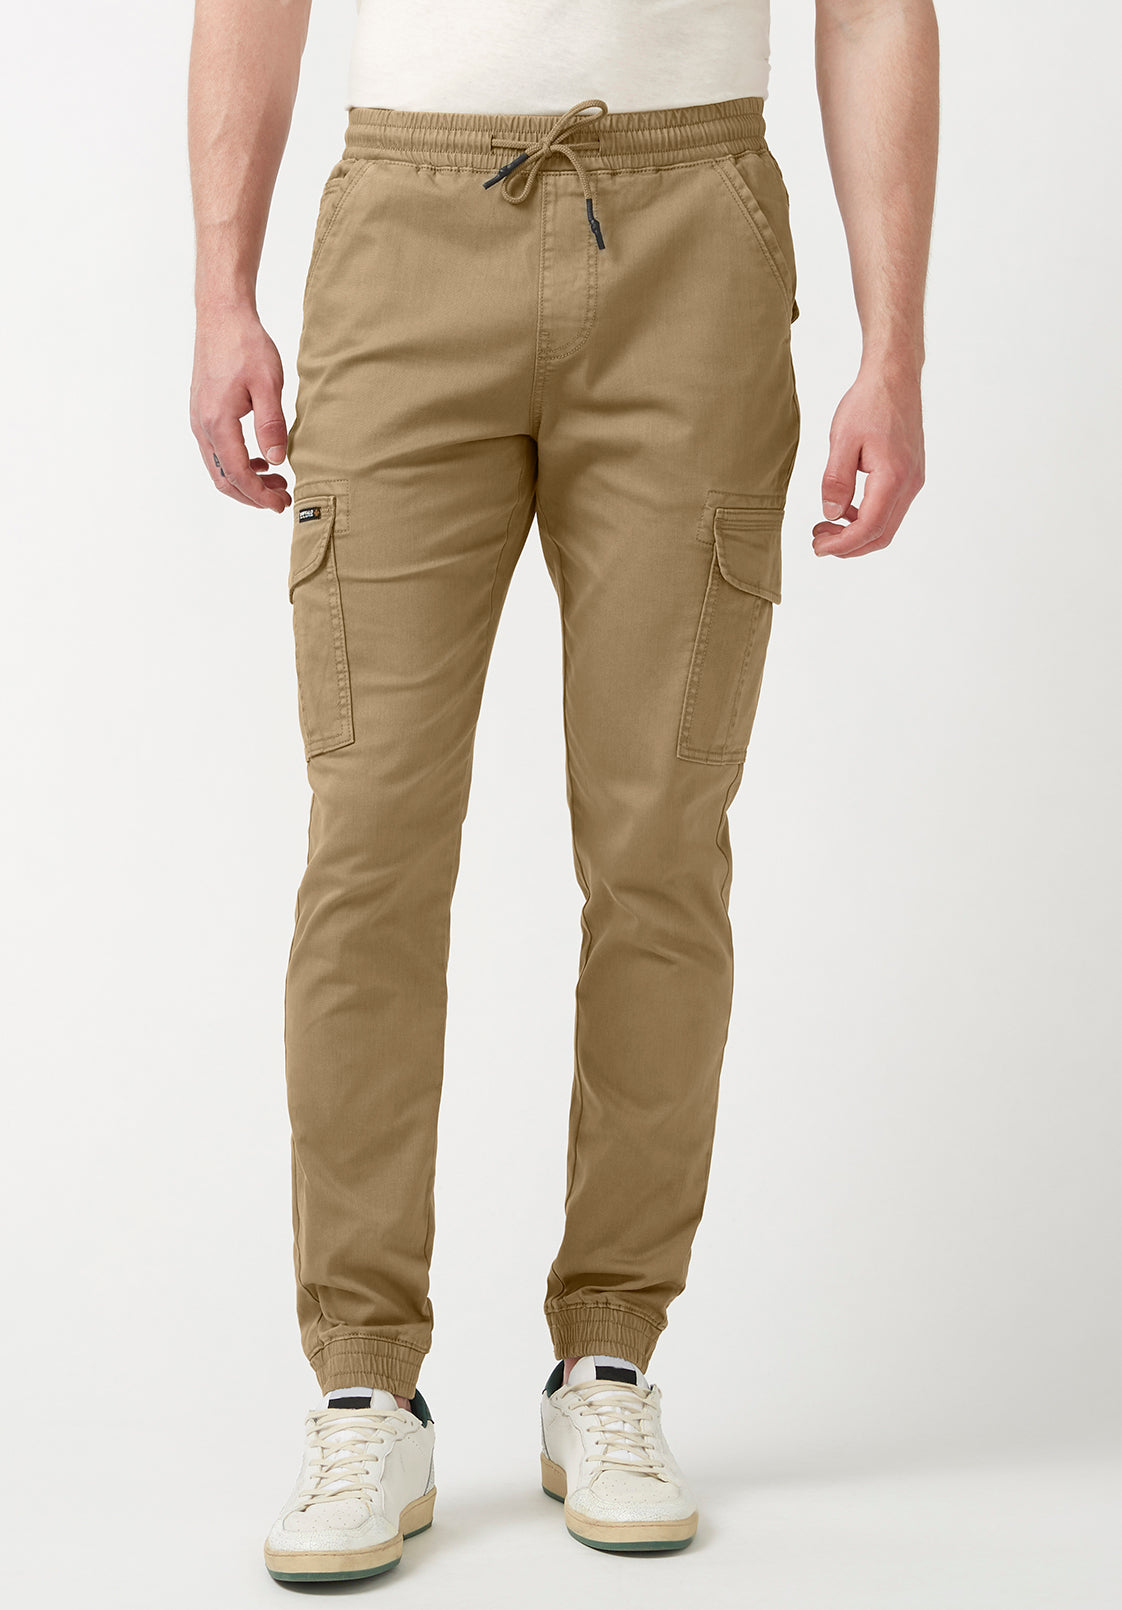 Cargo Joggers for Men Slim Fit Stretch Tapered Pants with Pockets